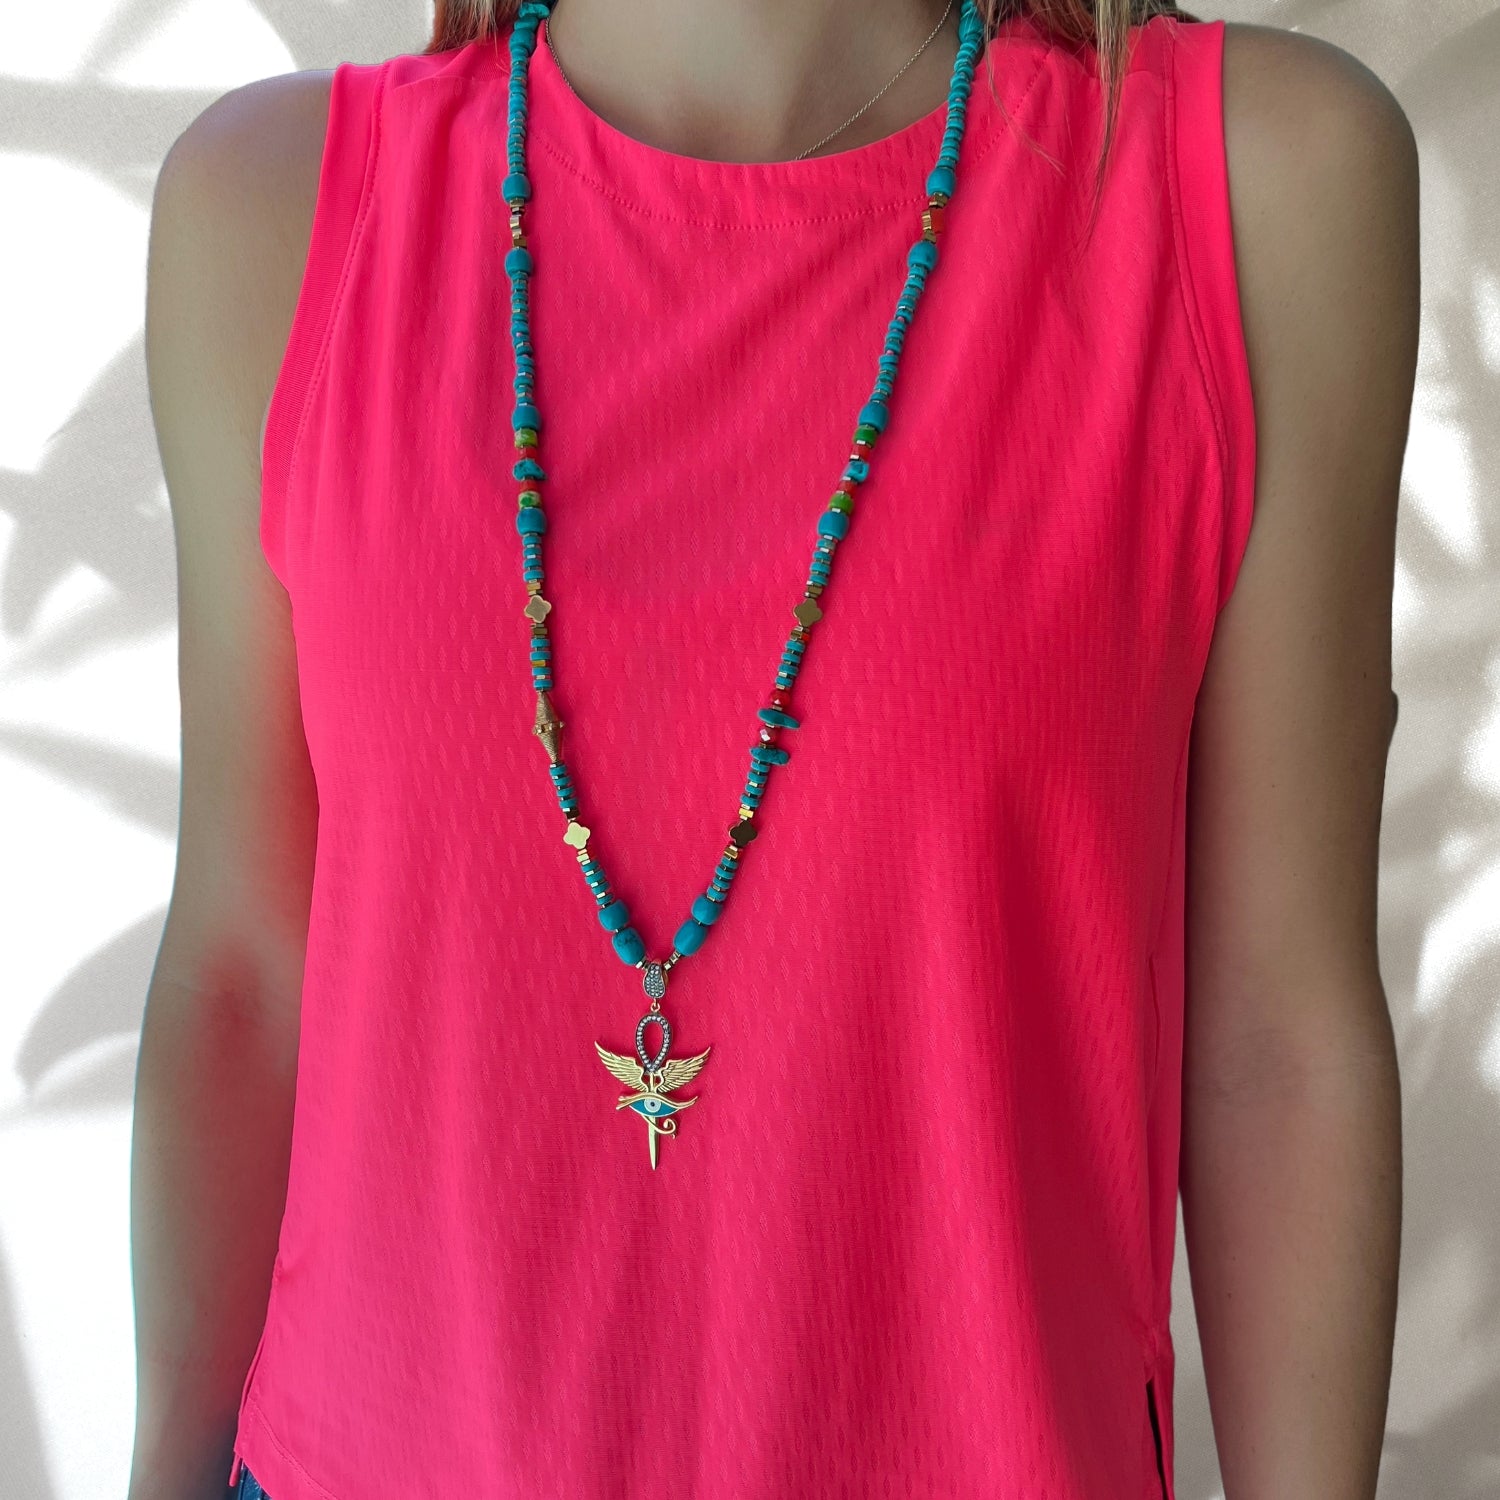 The eye-catching design of the Unique Eye of Horus Turquoise Necklace perfectly complementing the model's outfit